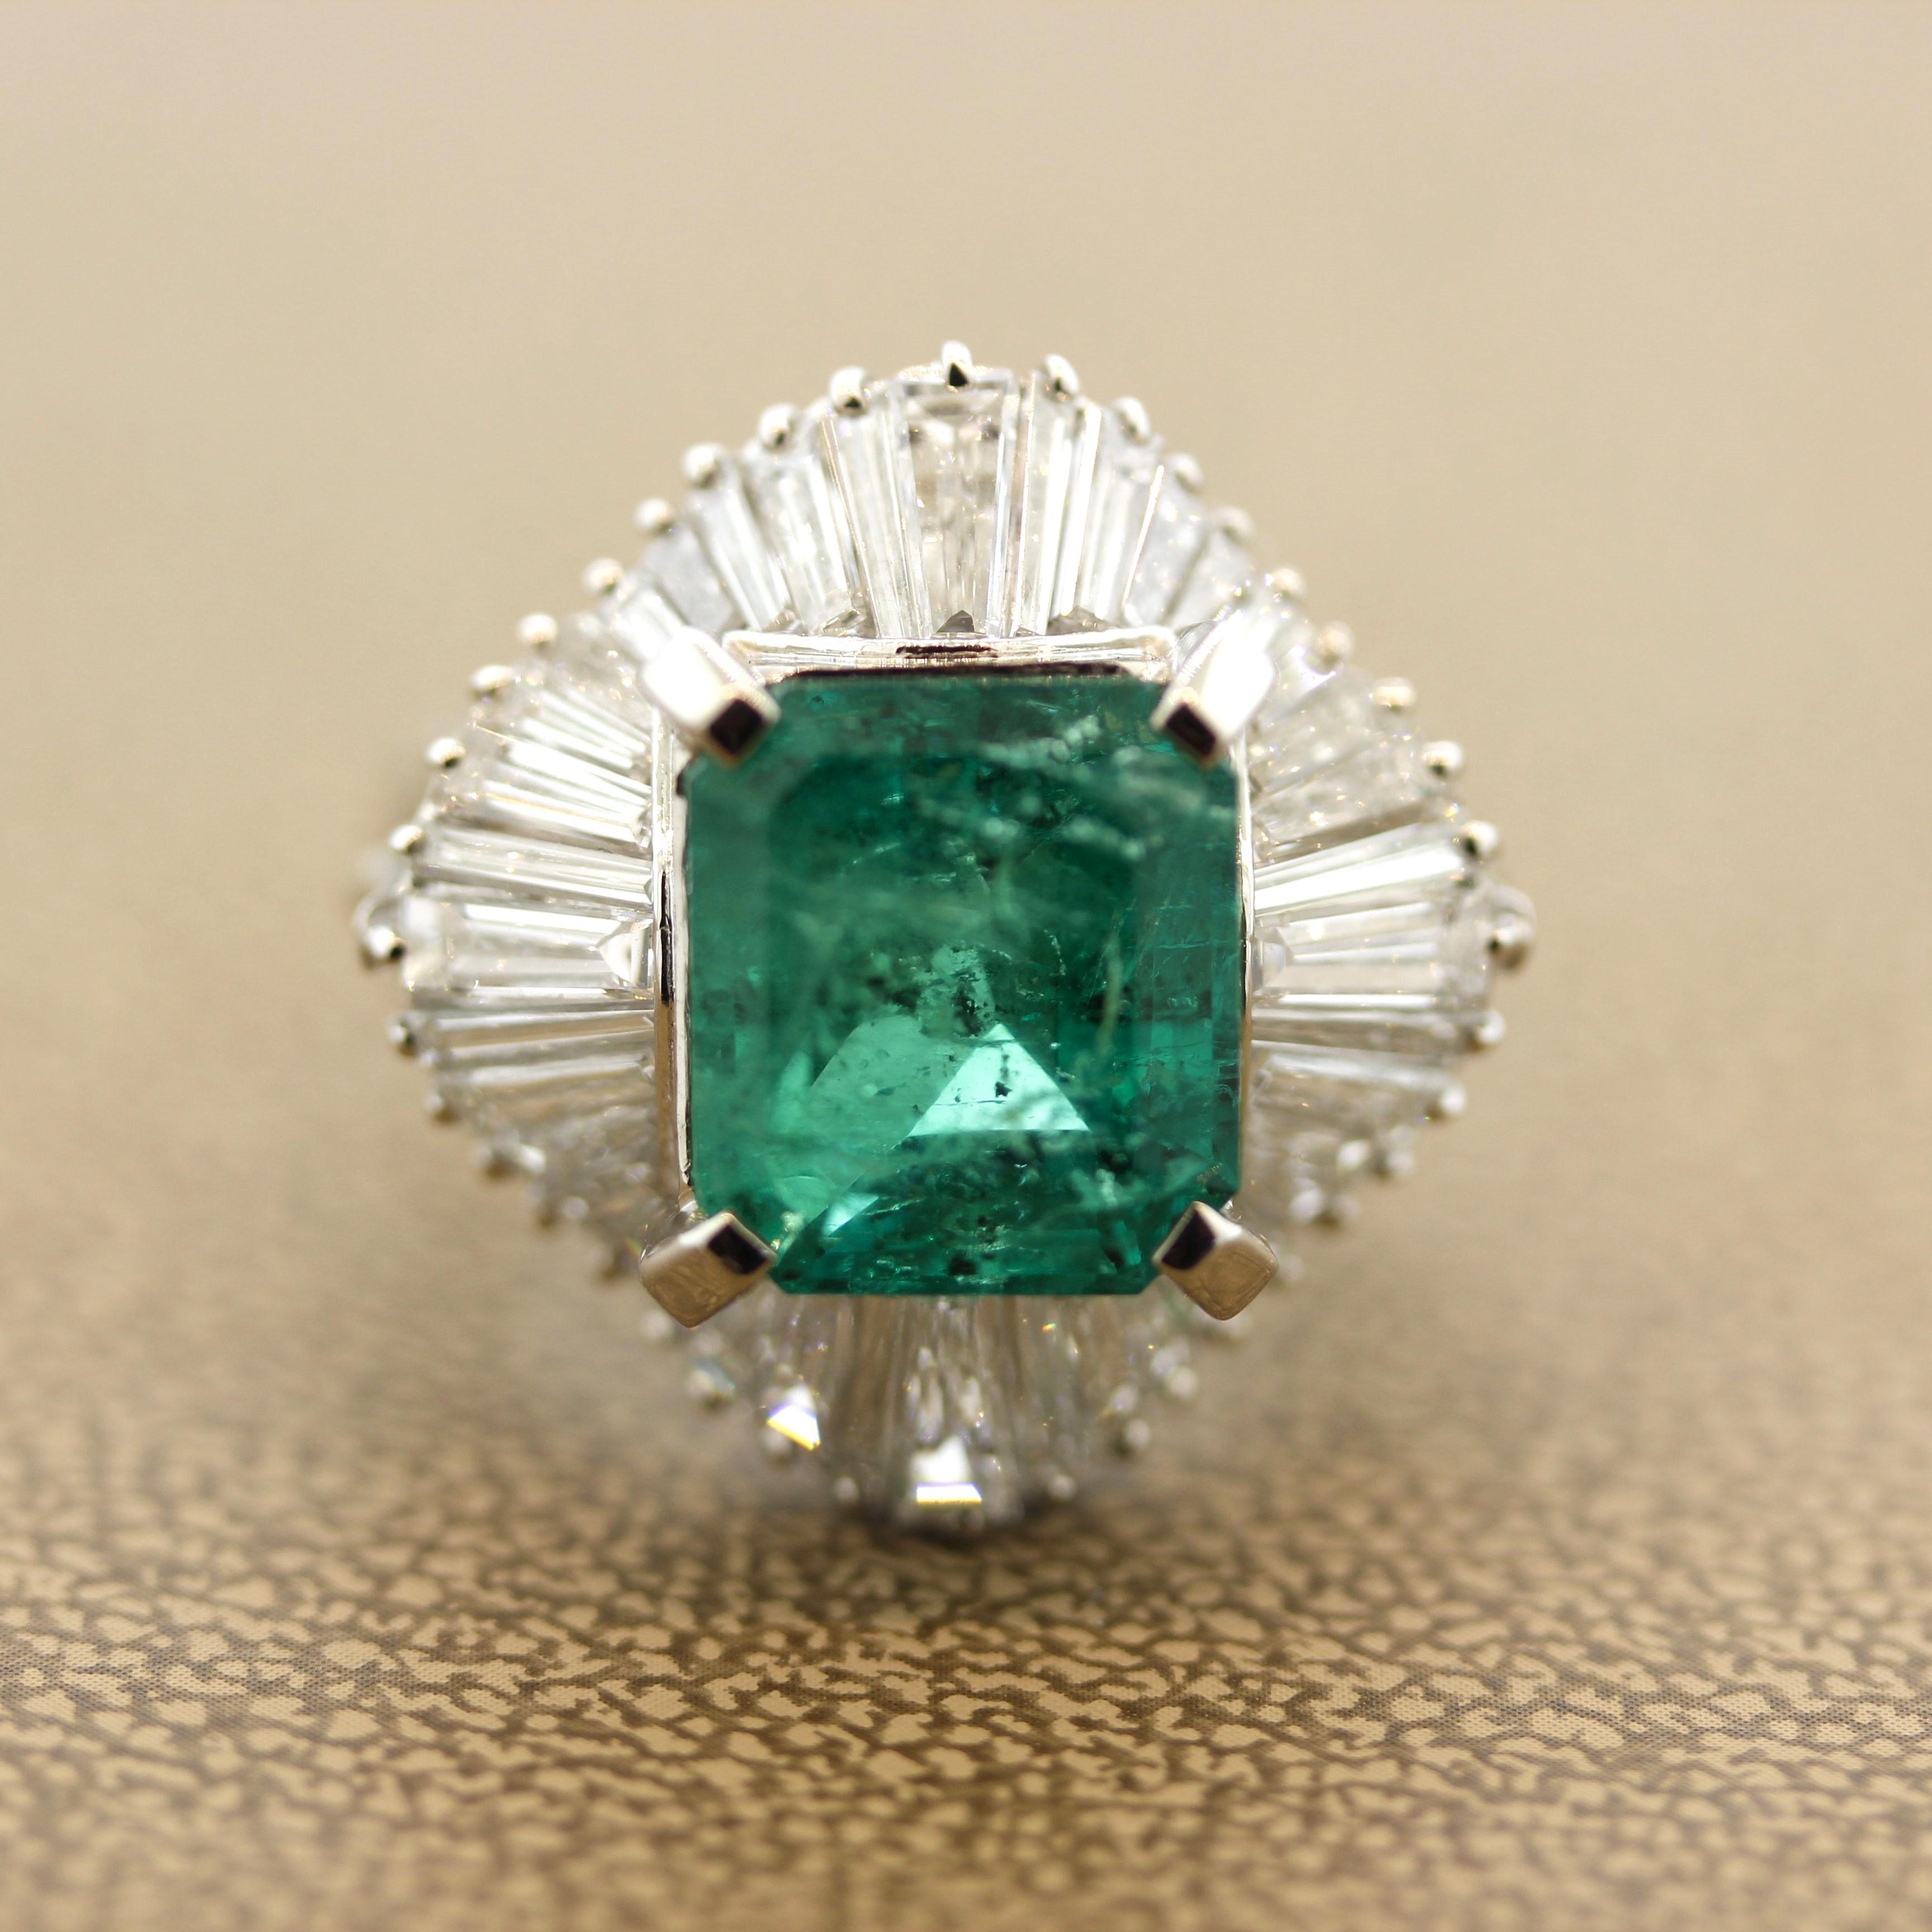 A large and substantial platinum ring featuring an impressive gem emerald weighing 5.21 carats. The emerald has a beautiful rich yet bright grass green color which is just so pleasing to look into. The clarity of the stone might not be the best, but